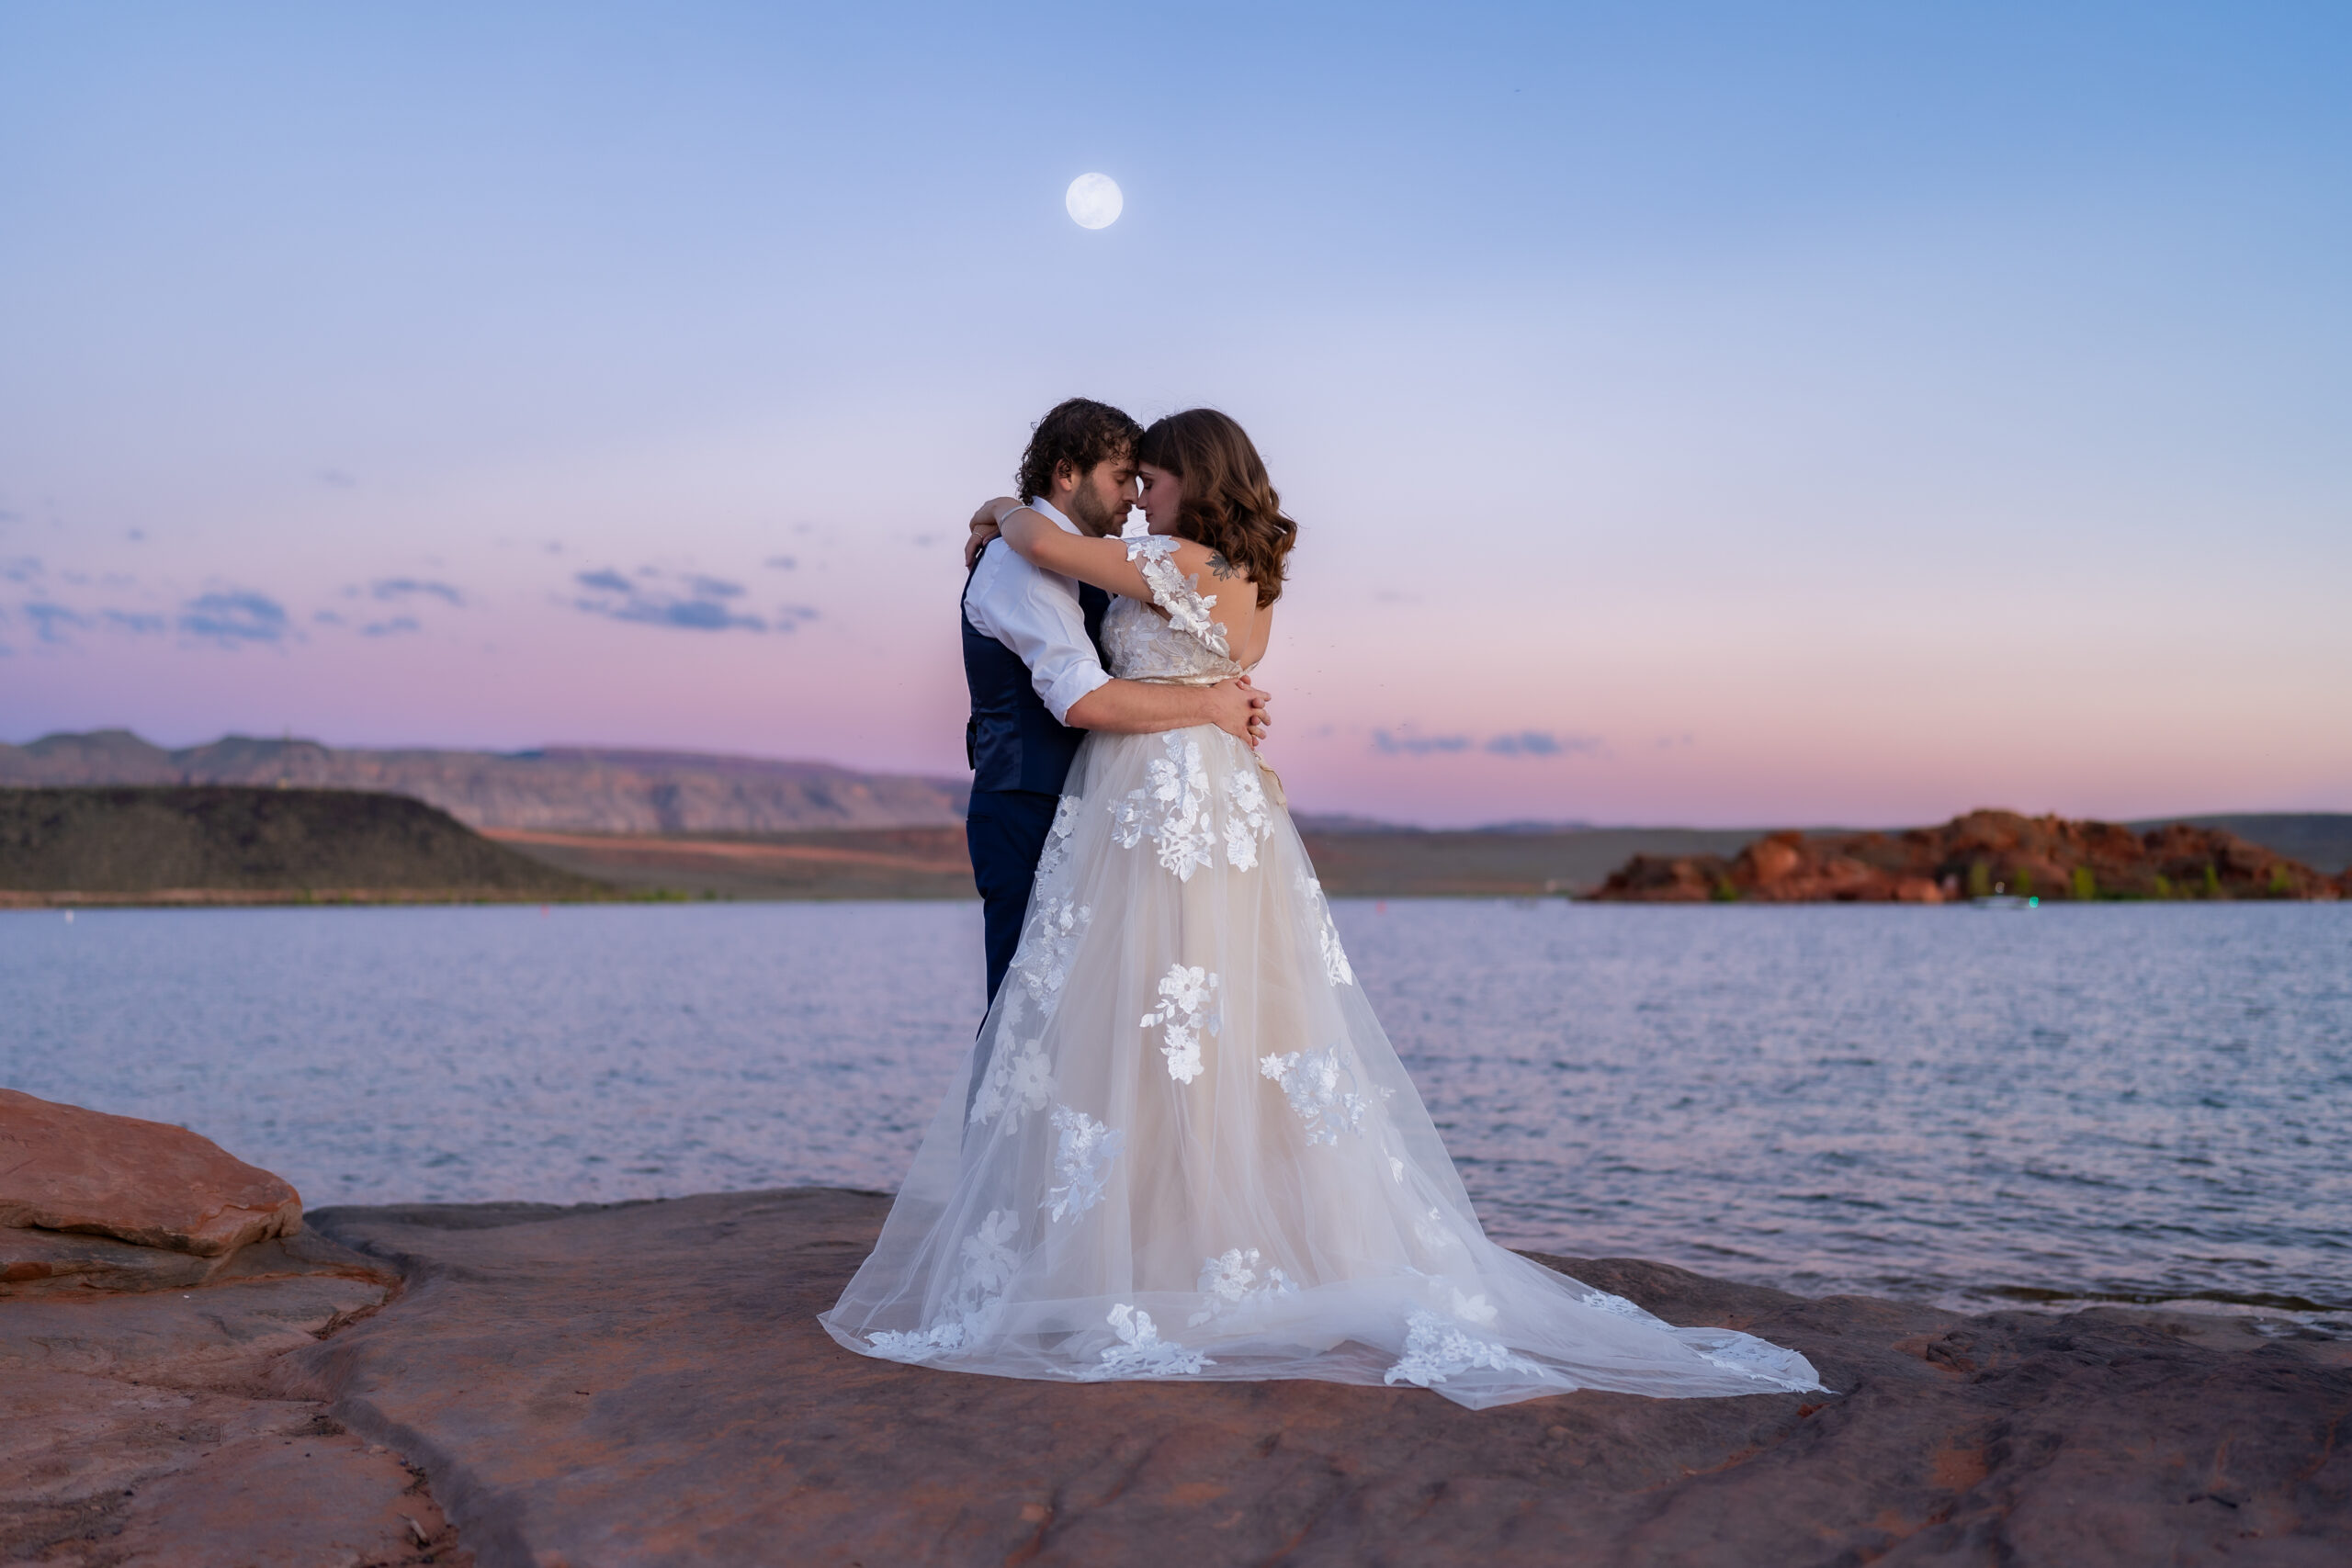 Bride and groom facing each other with their arms around each other and touching foreheads on the red rock shore near the water